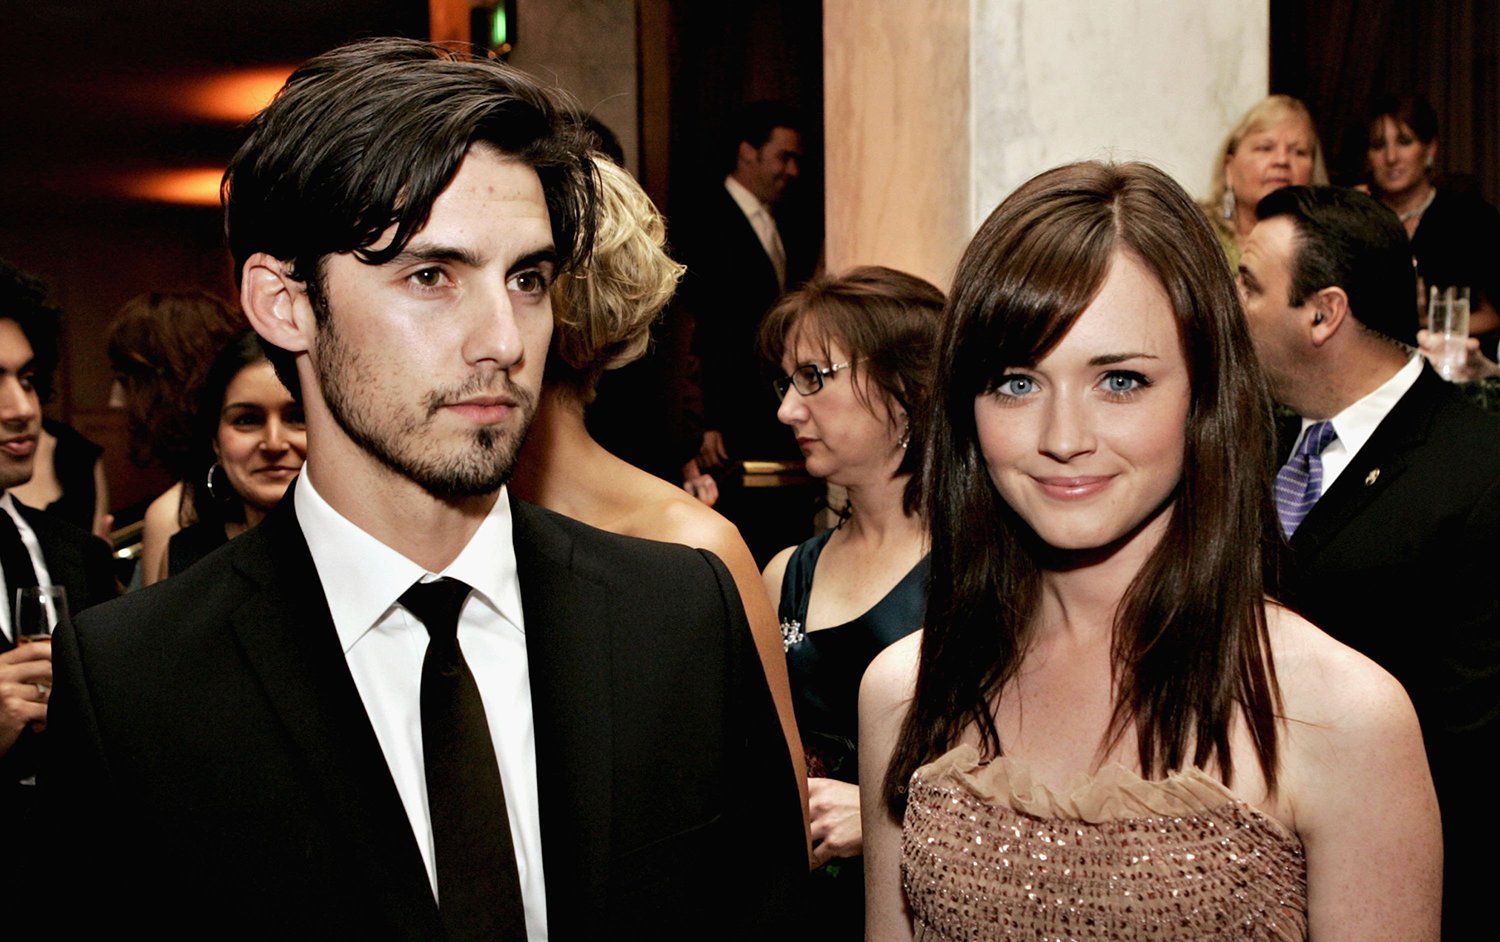 Milo Ventimiglia and Alexis Bledel, who played Jess Mariano and Rory Gilmore on Gilmore Girls.